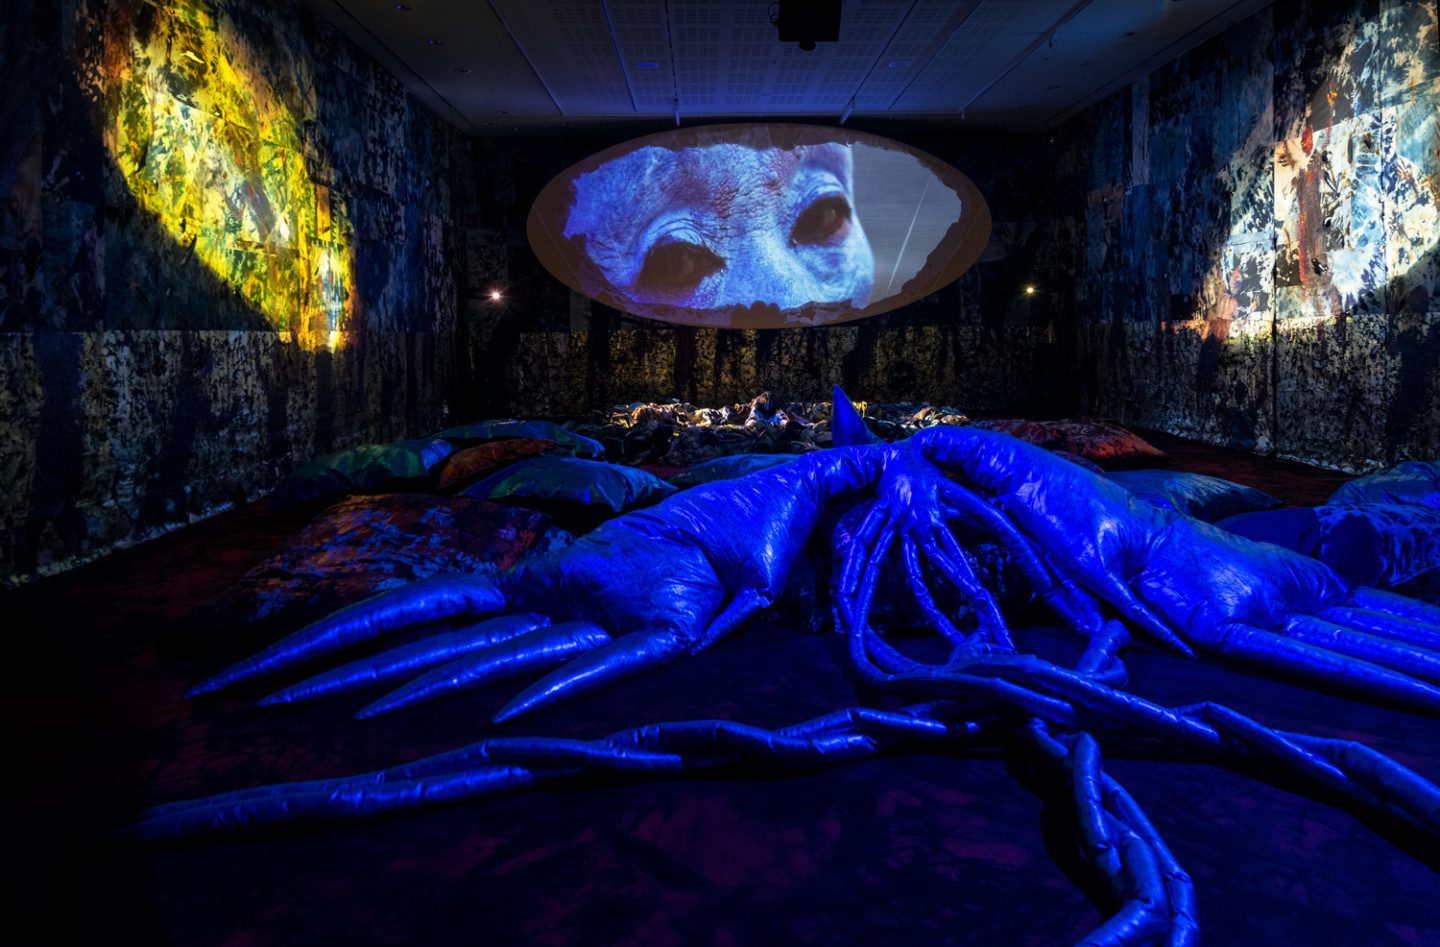 A dark room with projections on the wall